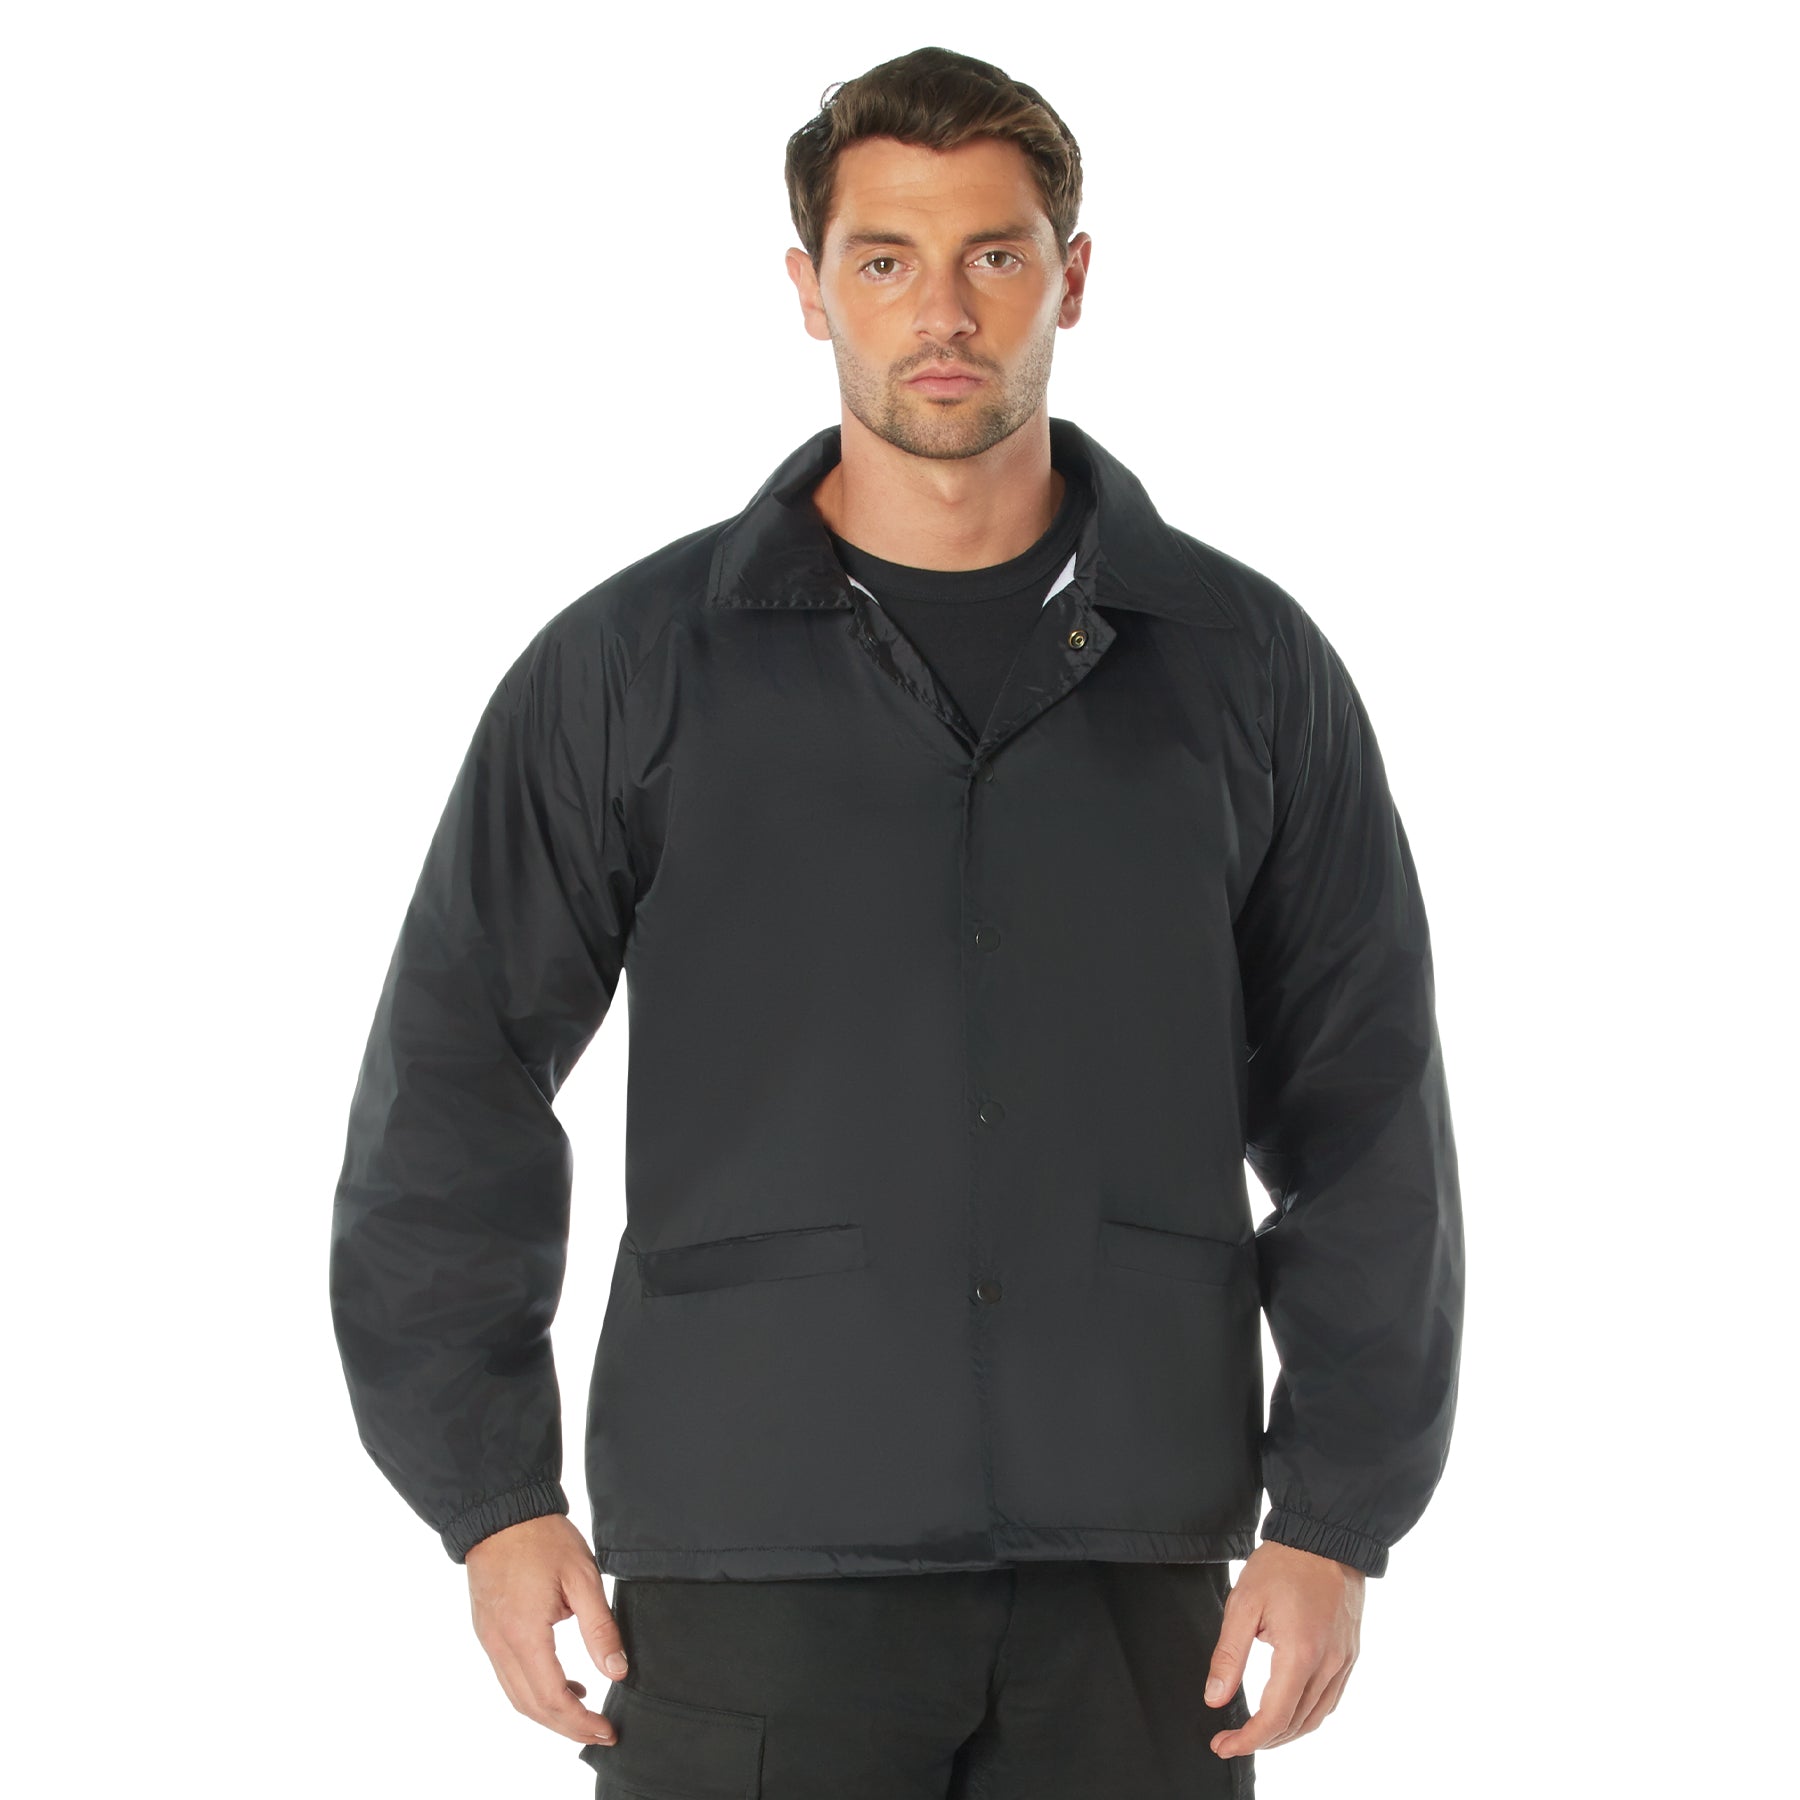 [Public Safety] Nylon Fleece-Lined Security Coaches Jackets Security White - Black